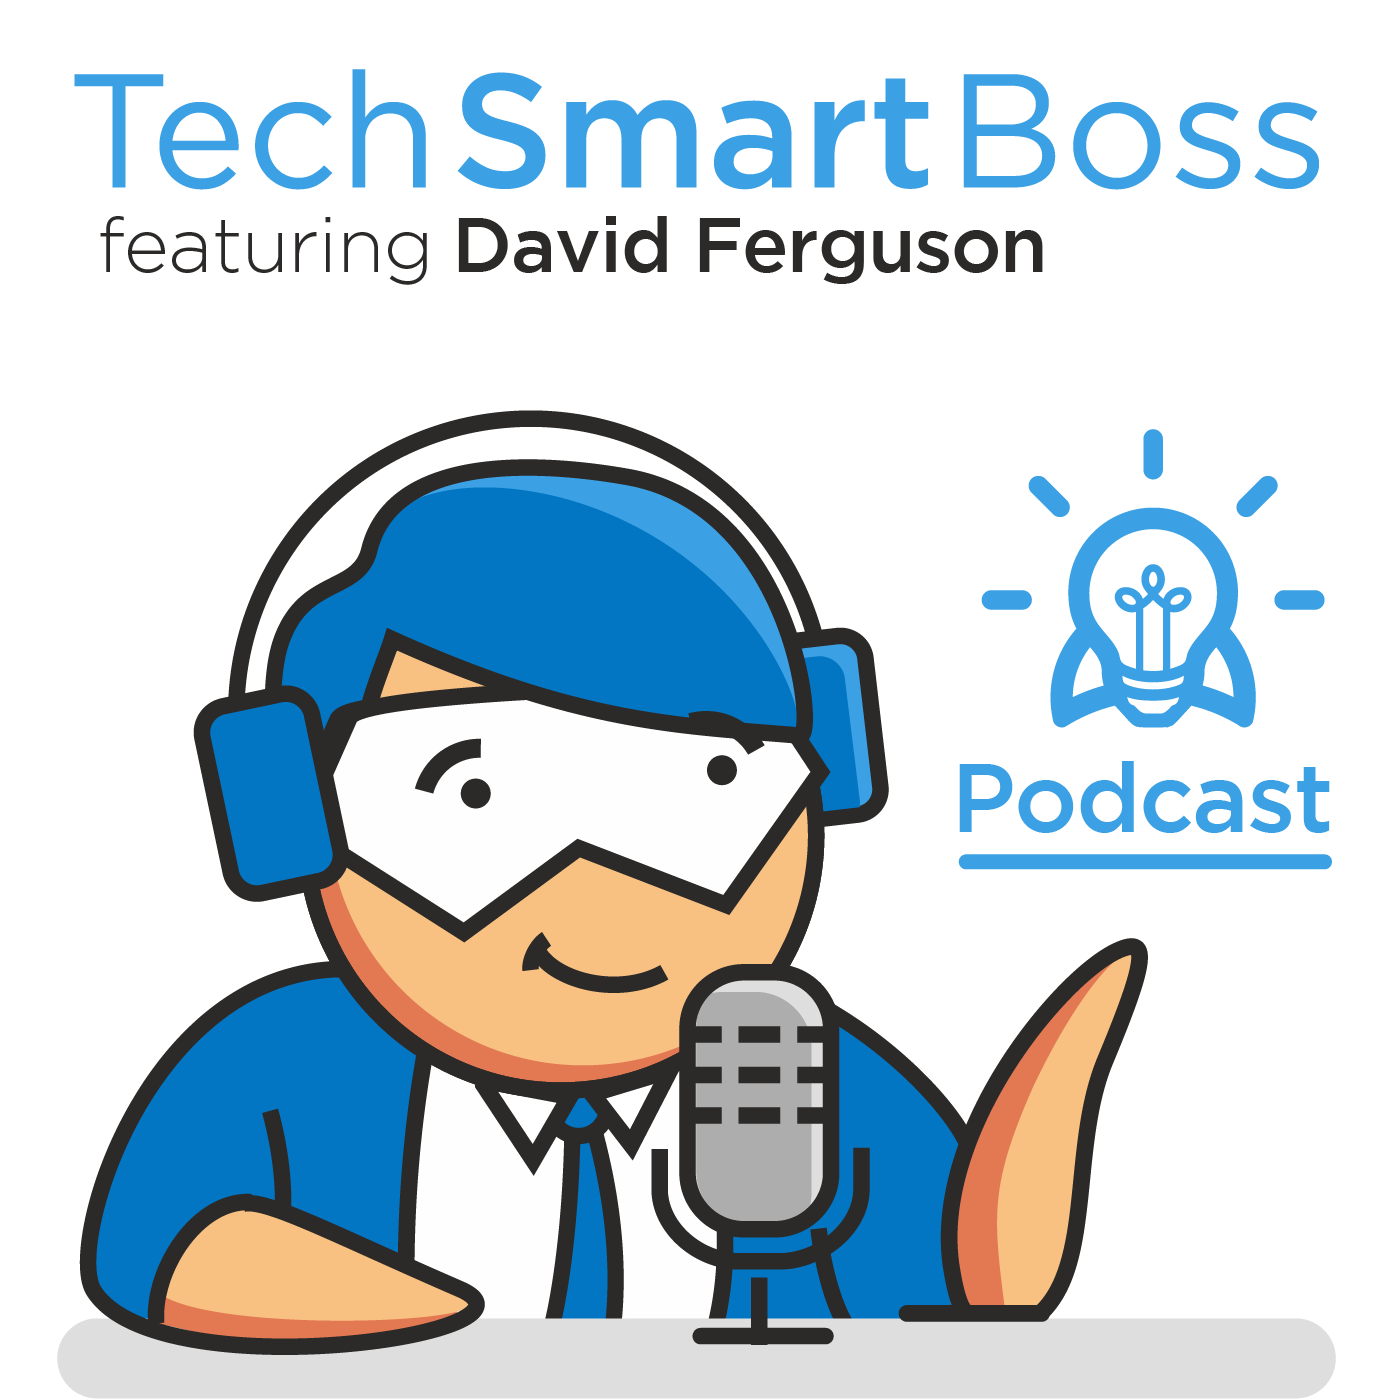 Episode 52: What I've Learned After One Year Of Tech Smart Boss (And How I'm Applying It To My Biz)